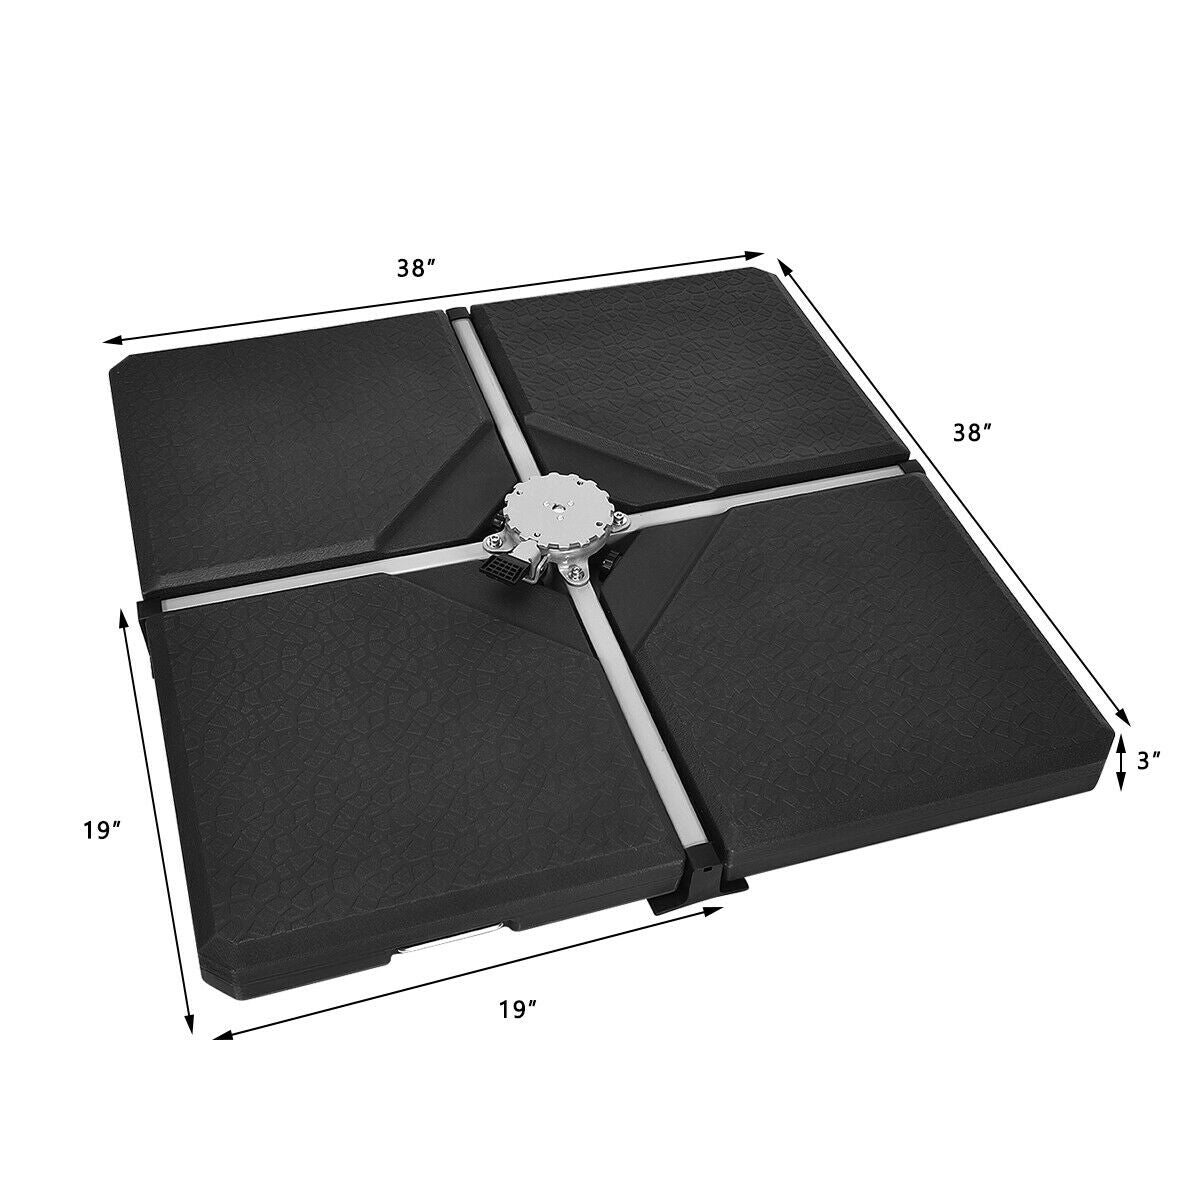 4 Pieces Square Fillable Patio Umbrella Base Set with Handle and Funnel